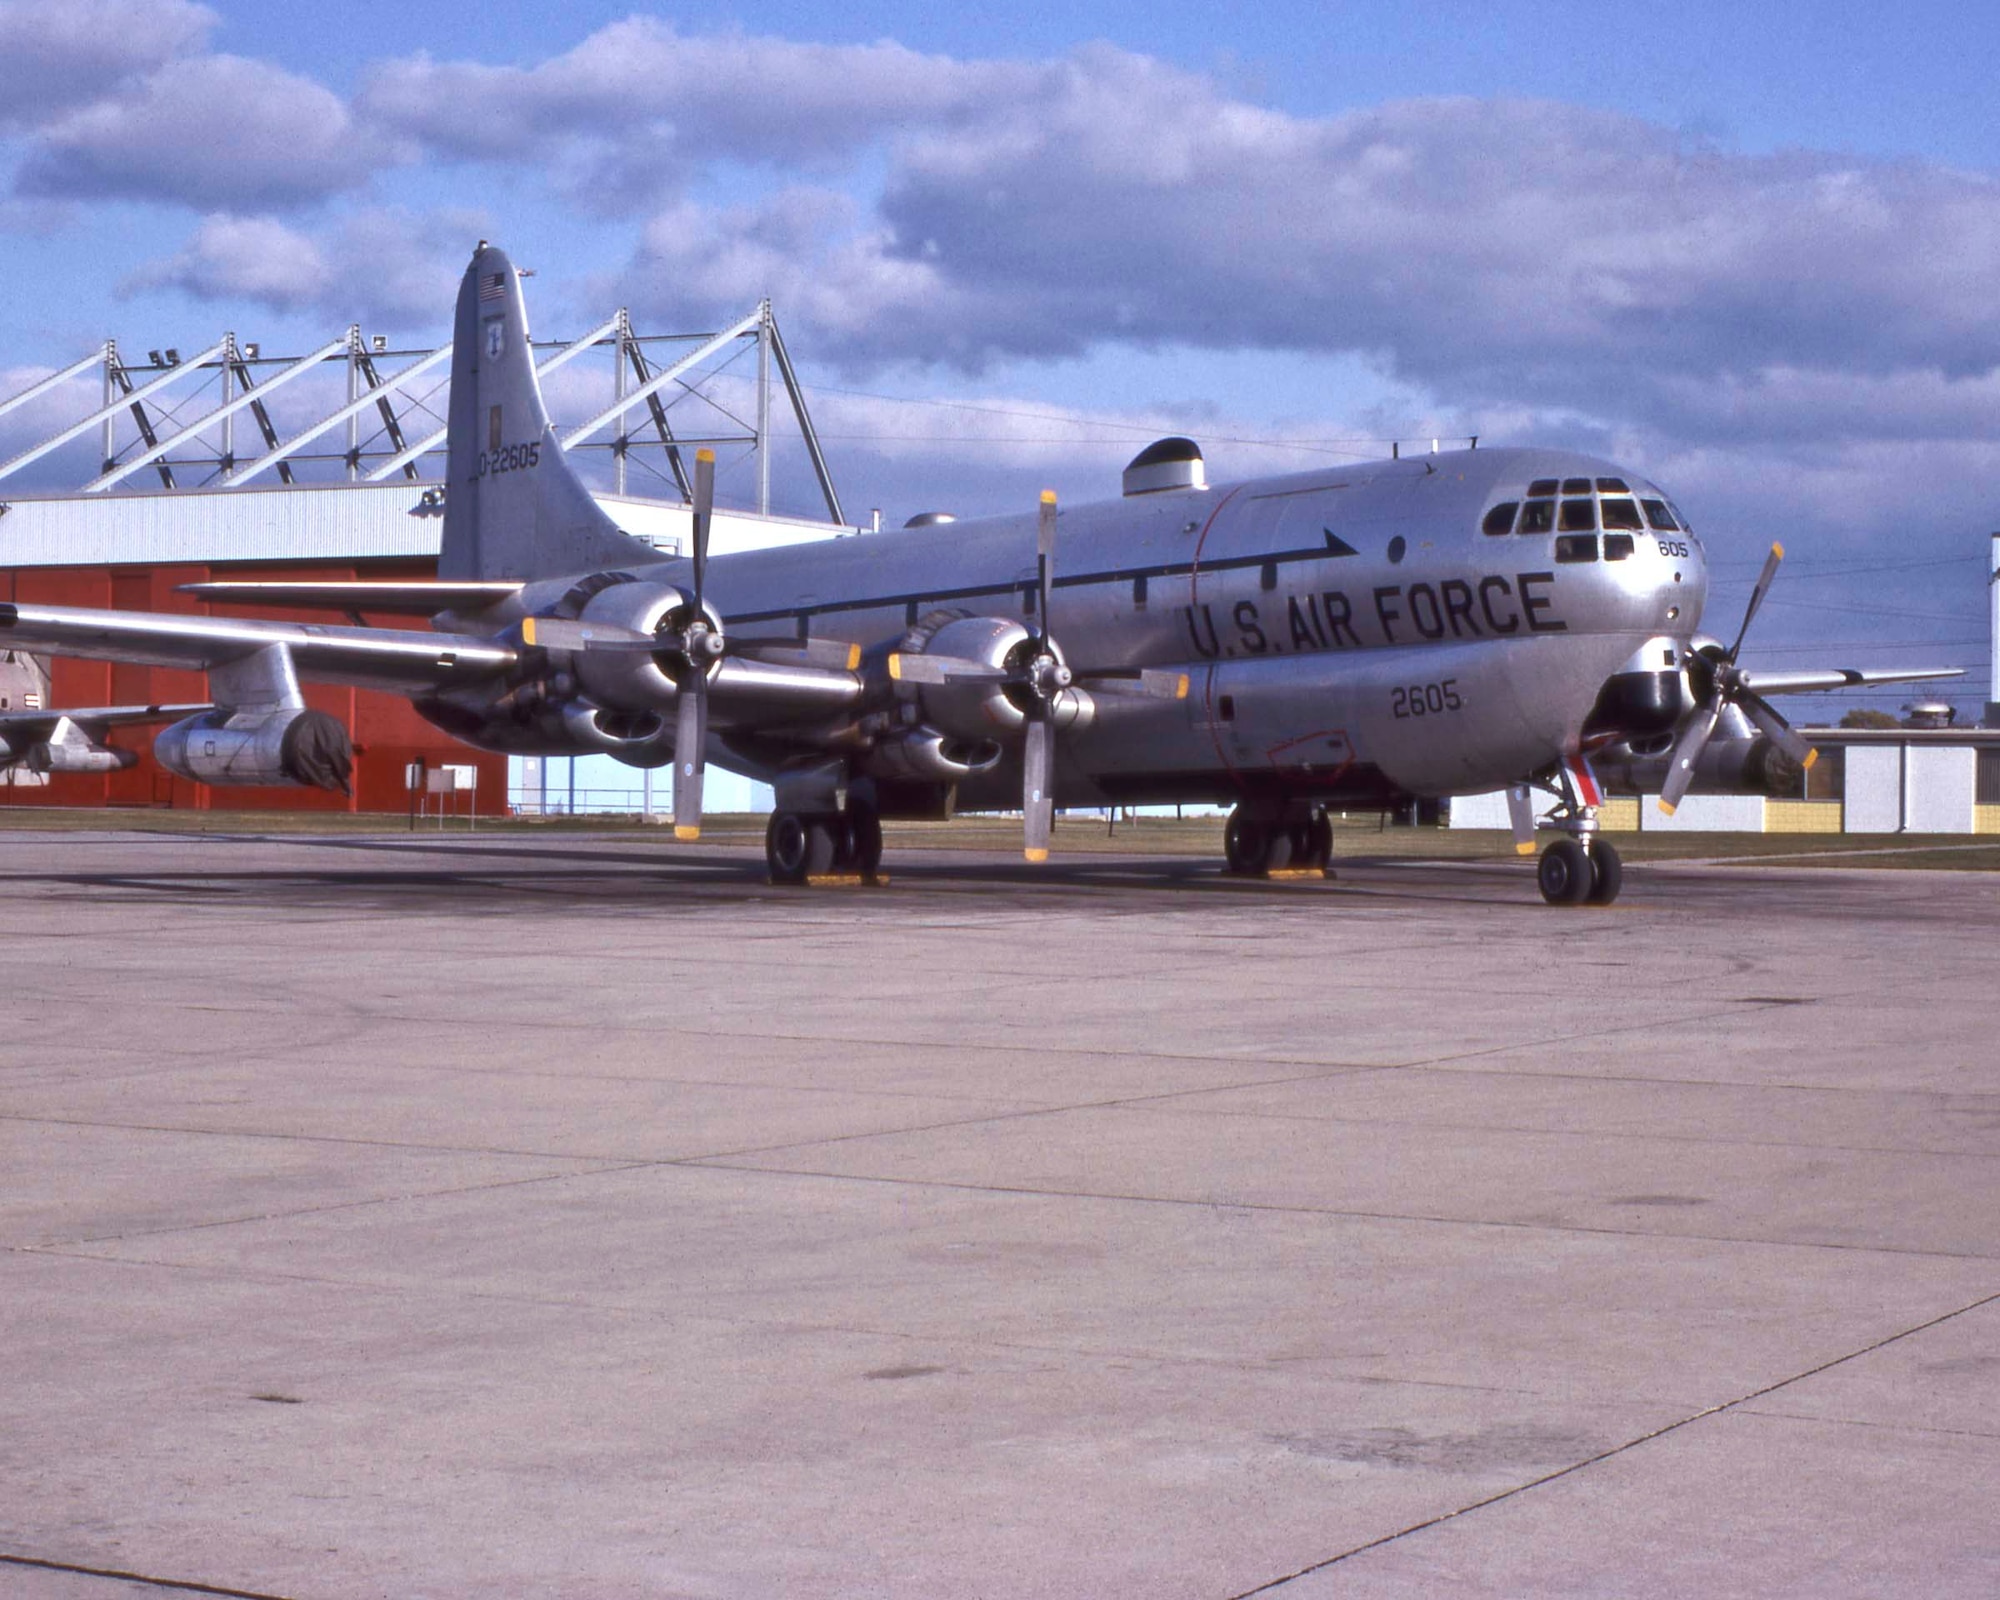 KC-97 "Stratotanker". First flown by the unit in 1962, and retired in January, 1978, when it was replaced by the jet-powered, much more capable KC-135.